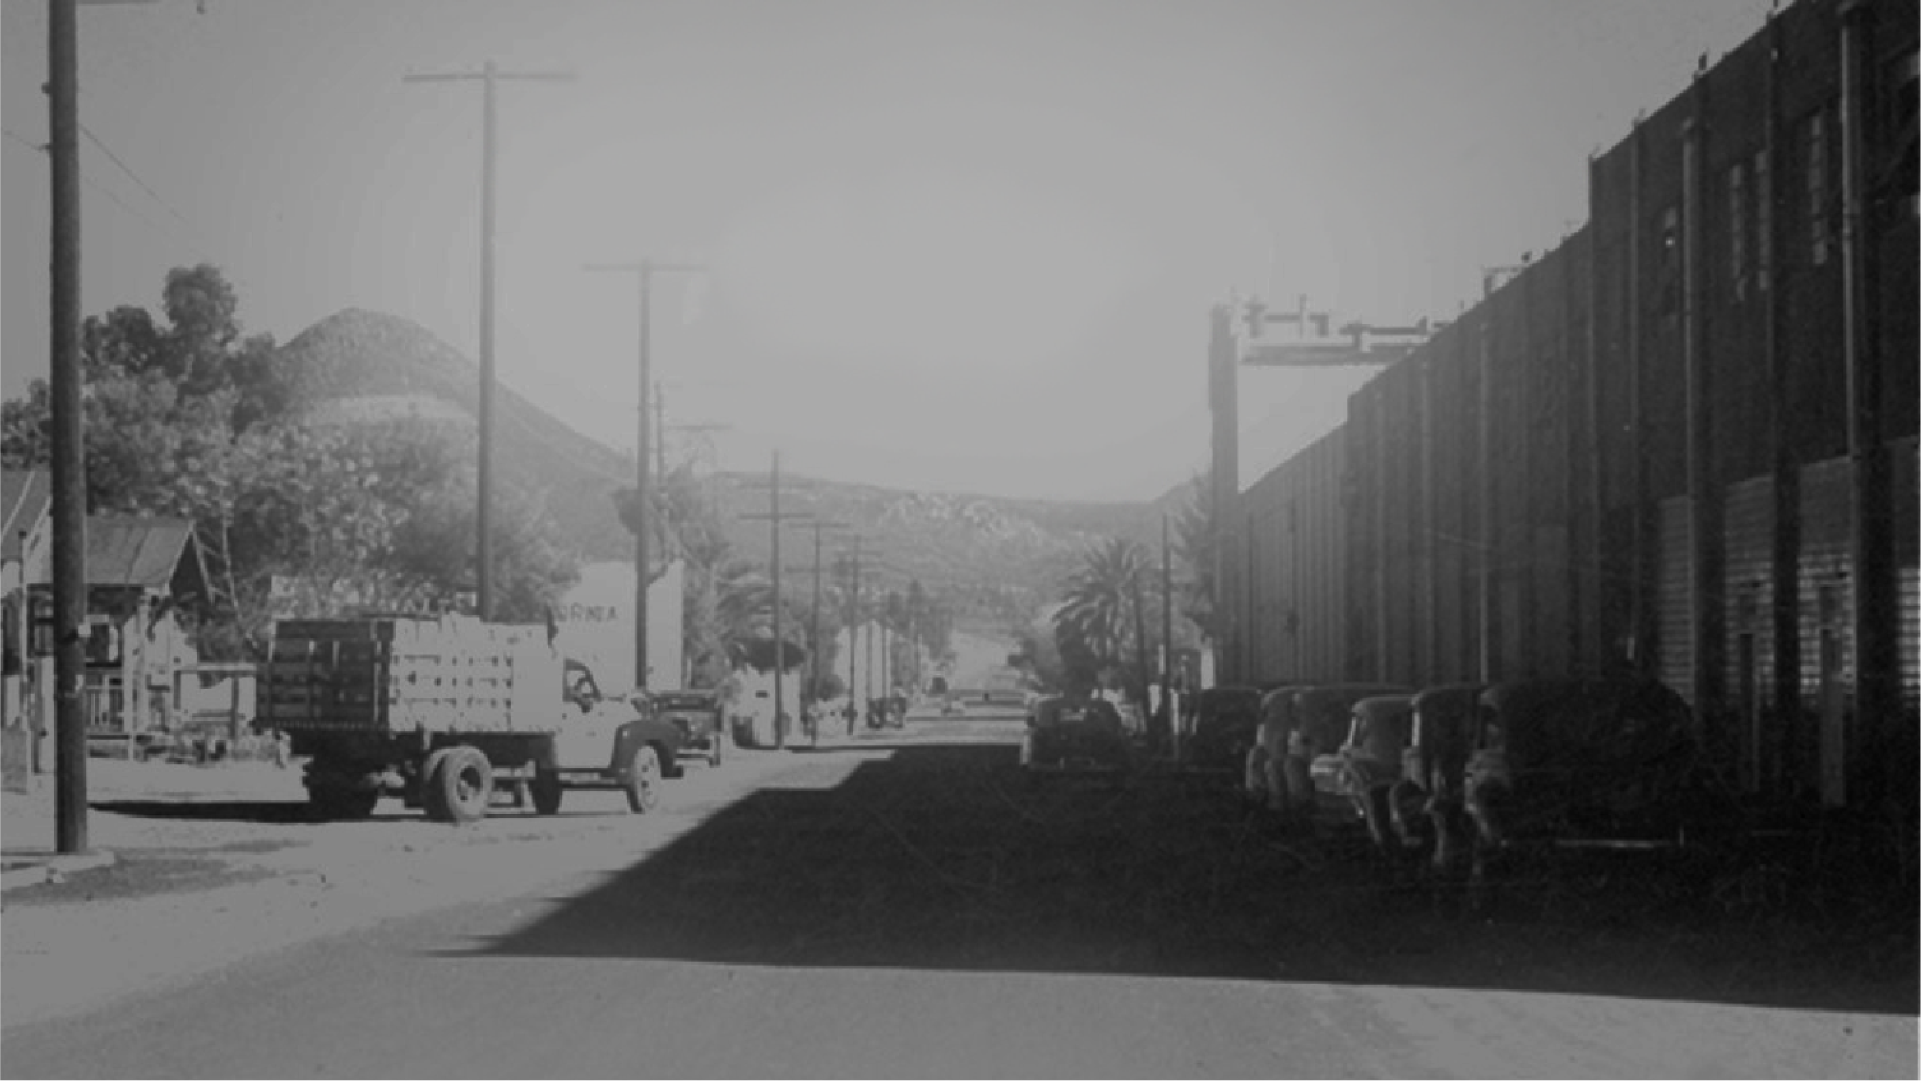 Ground view of the town of Tecate´s street at the time of the companys founding.